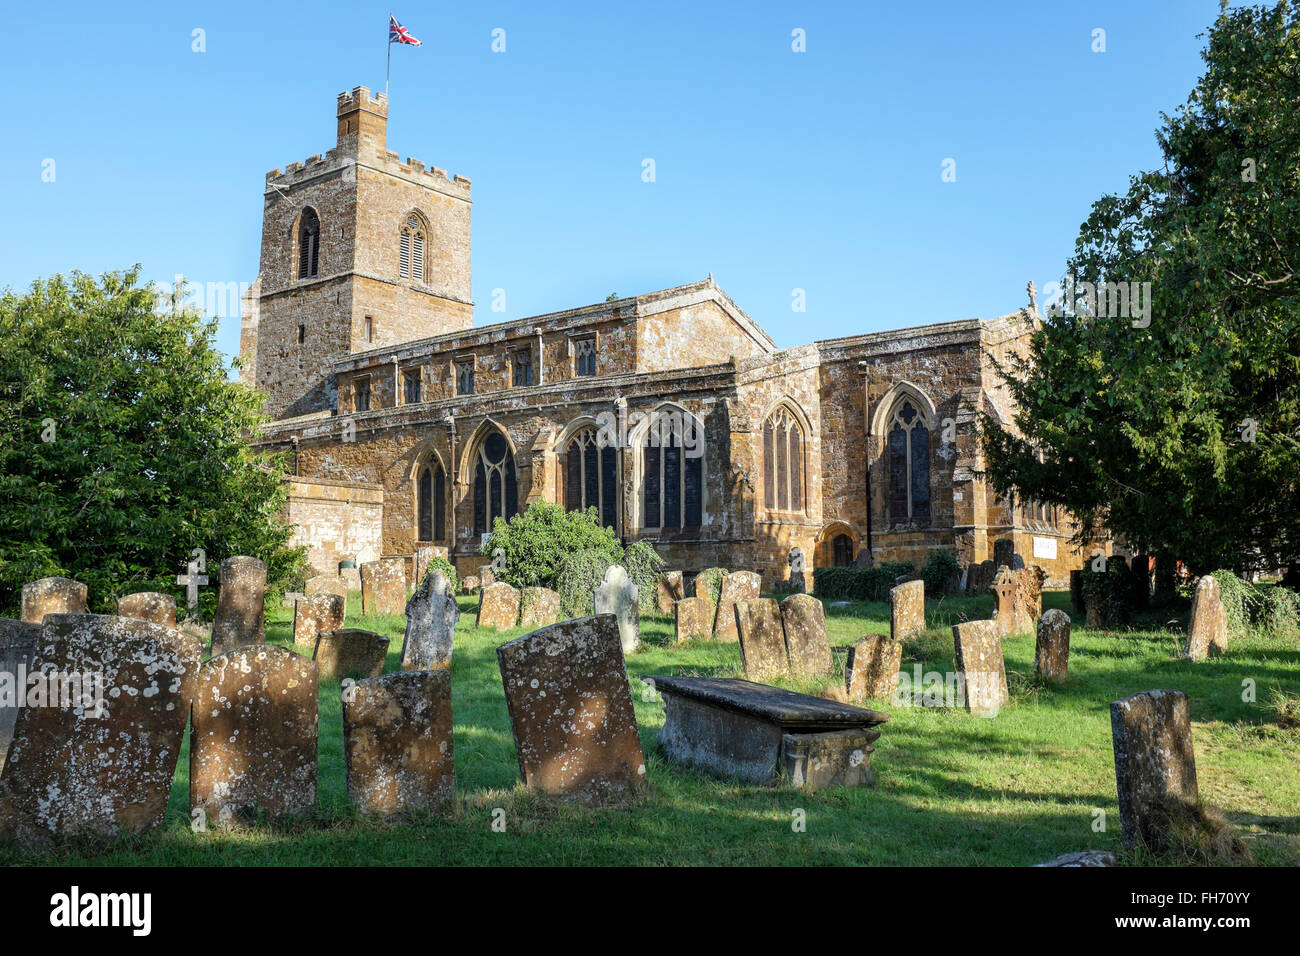 The Church of St Mary the Virgin, Cropredy, Oxfordshire, England Stock Photo